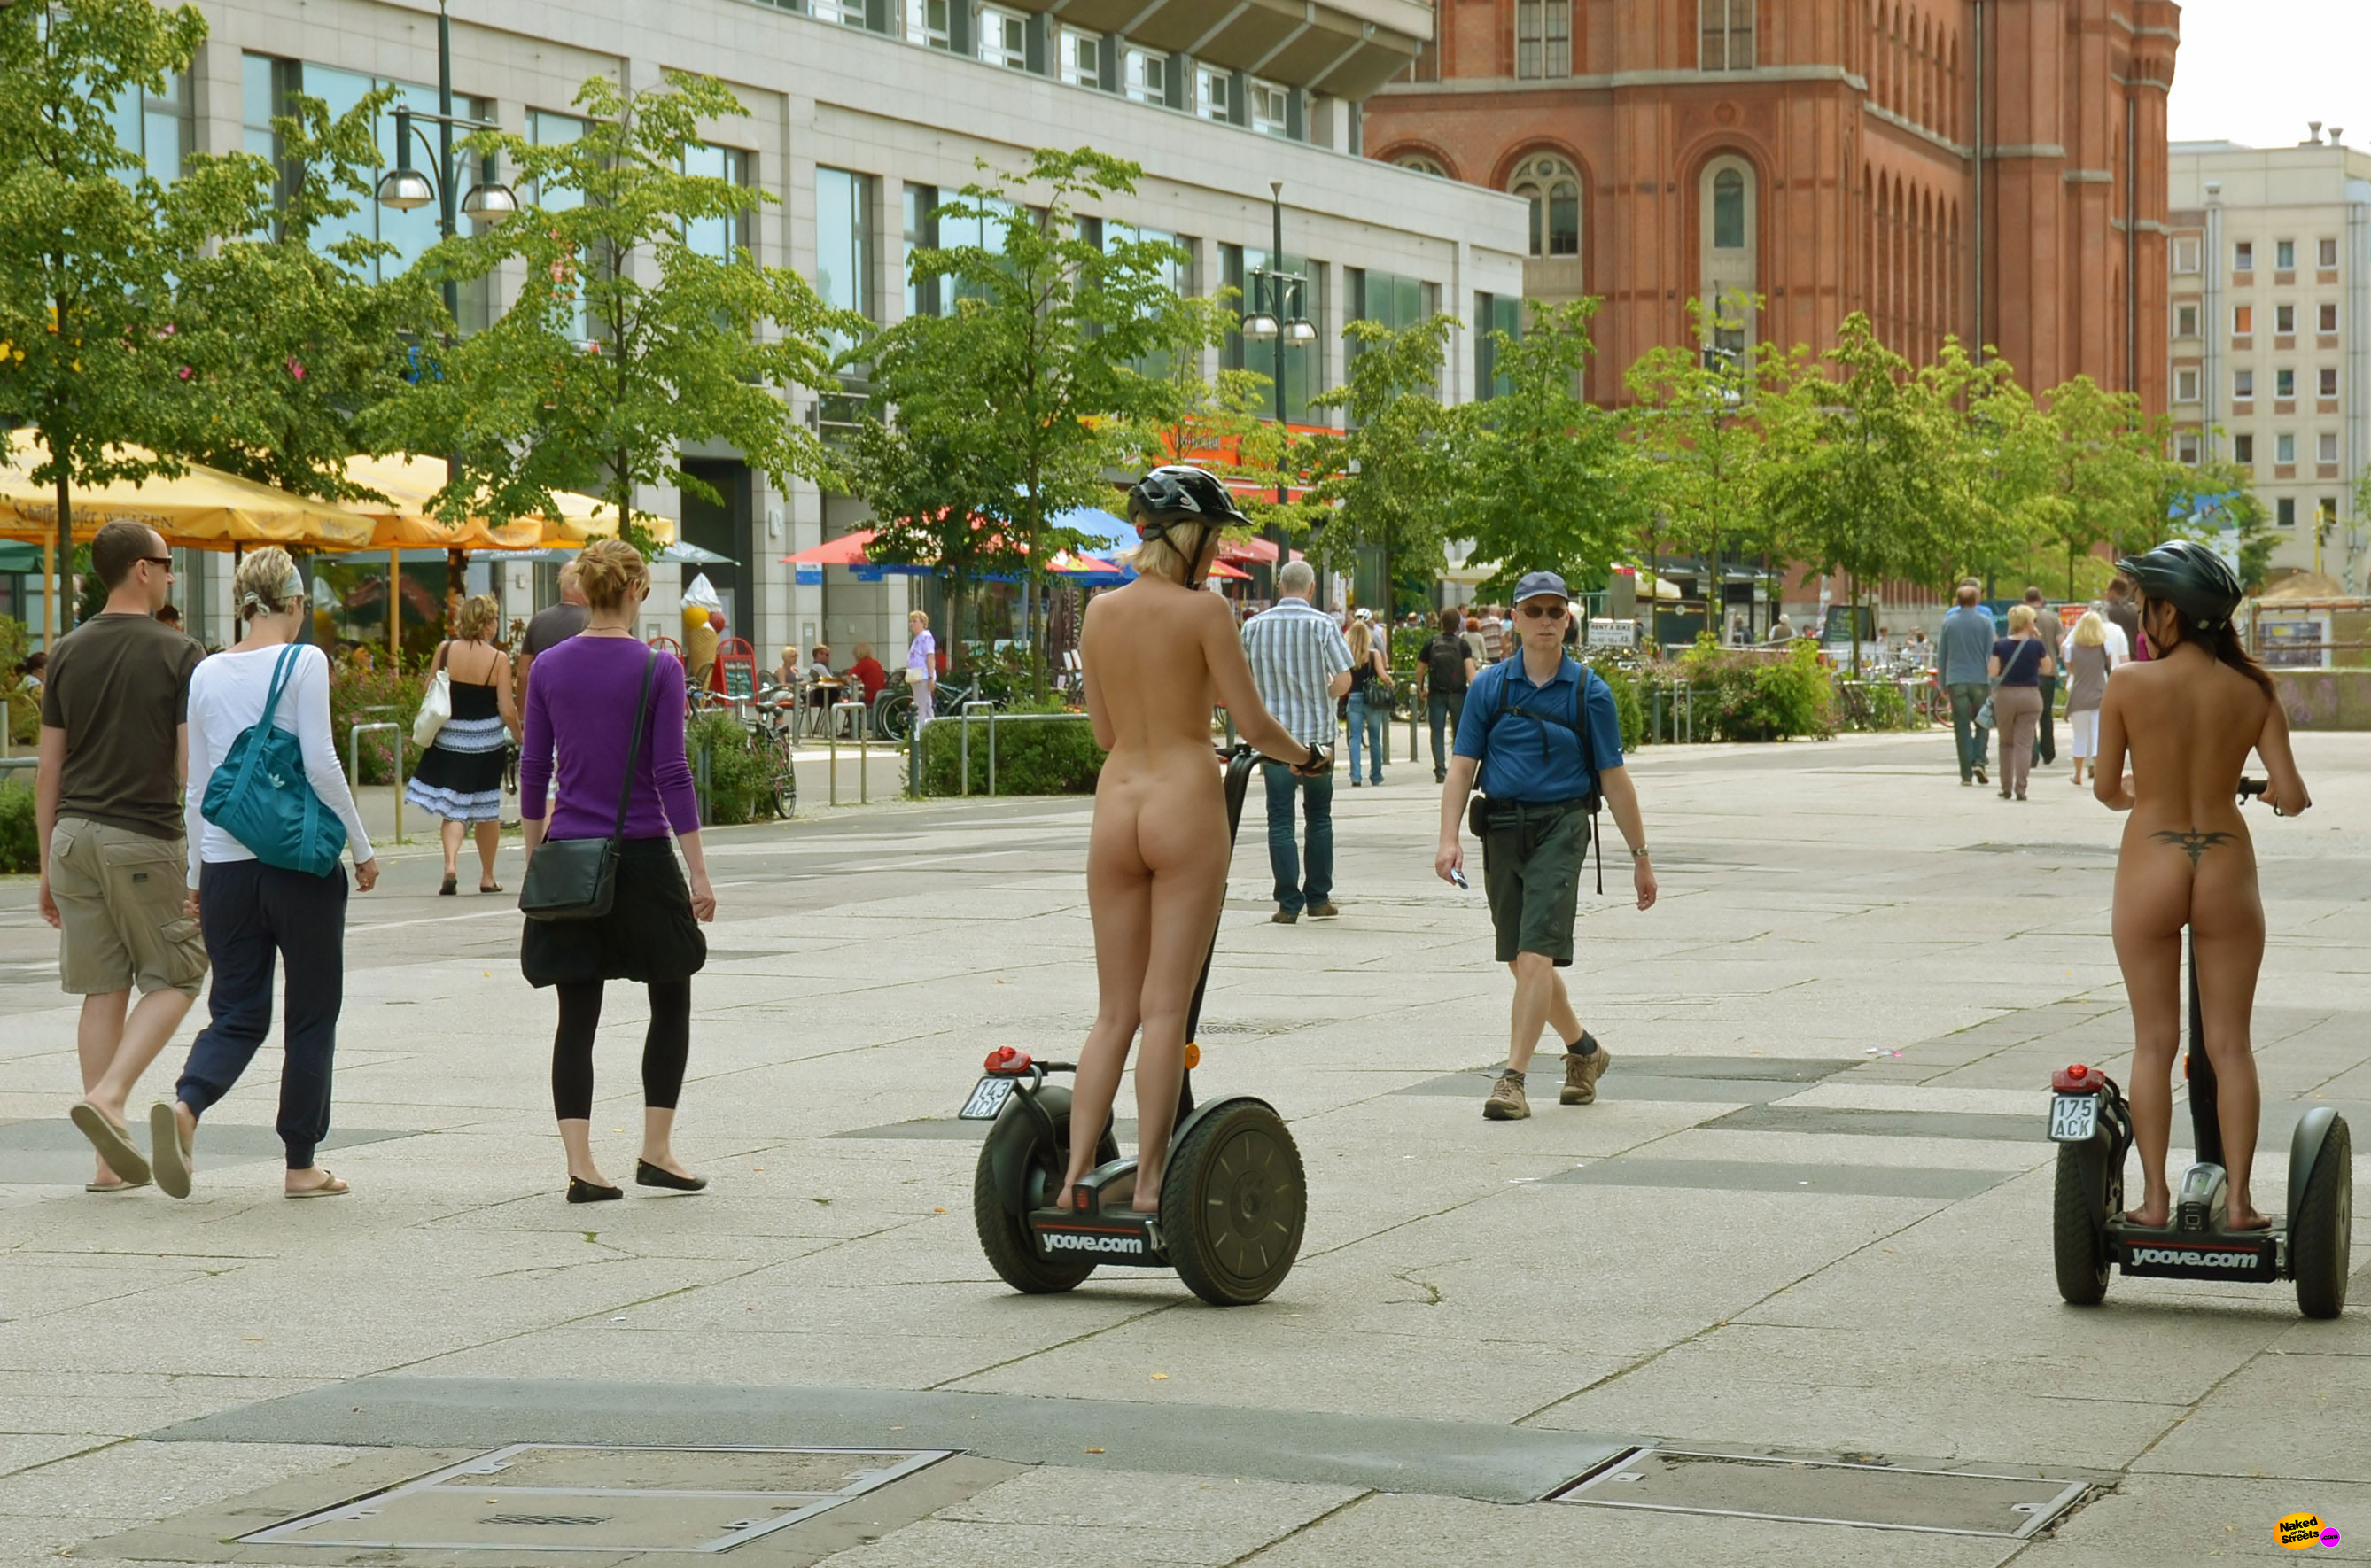 Taking your clothes off allows for perfect segway driving